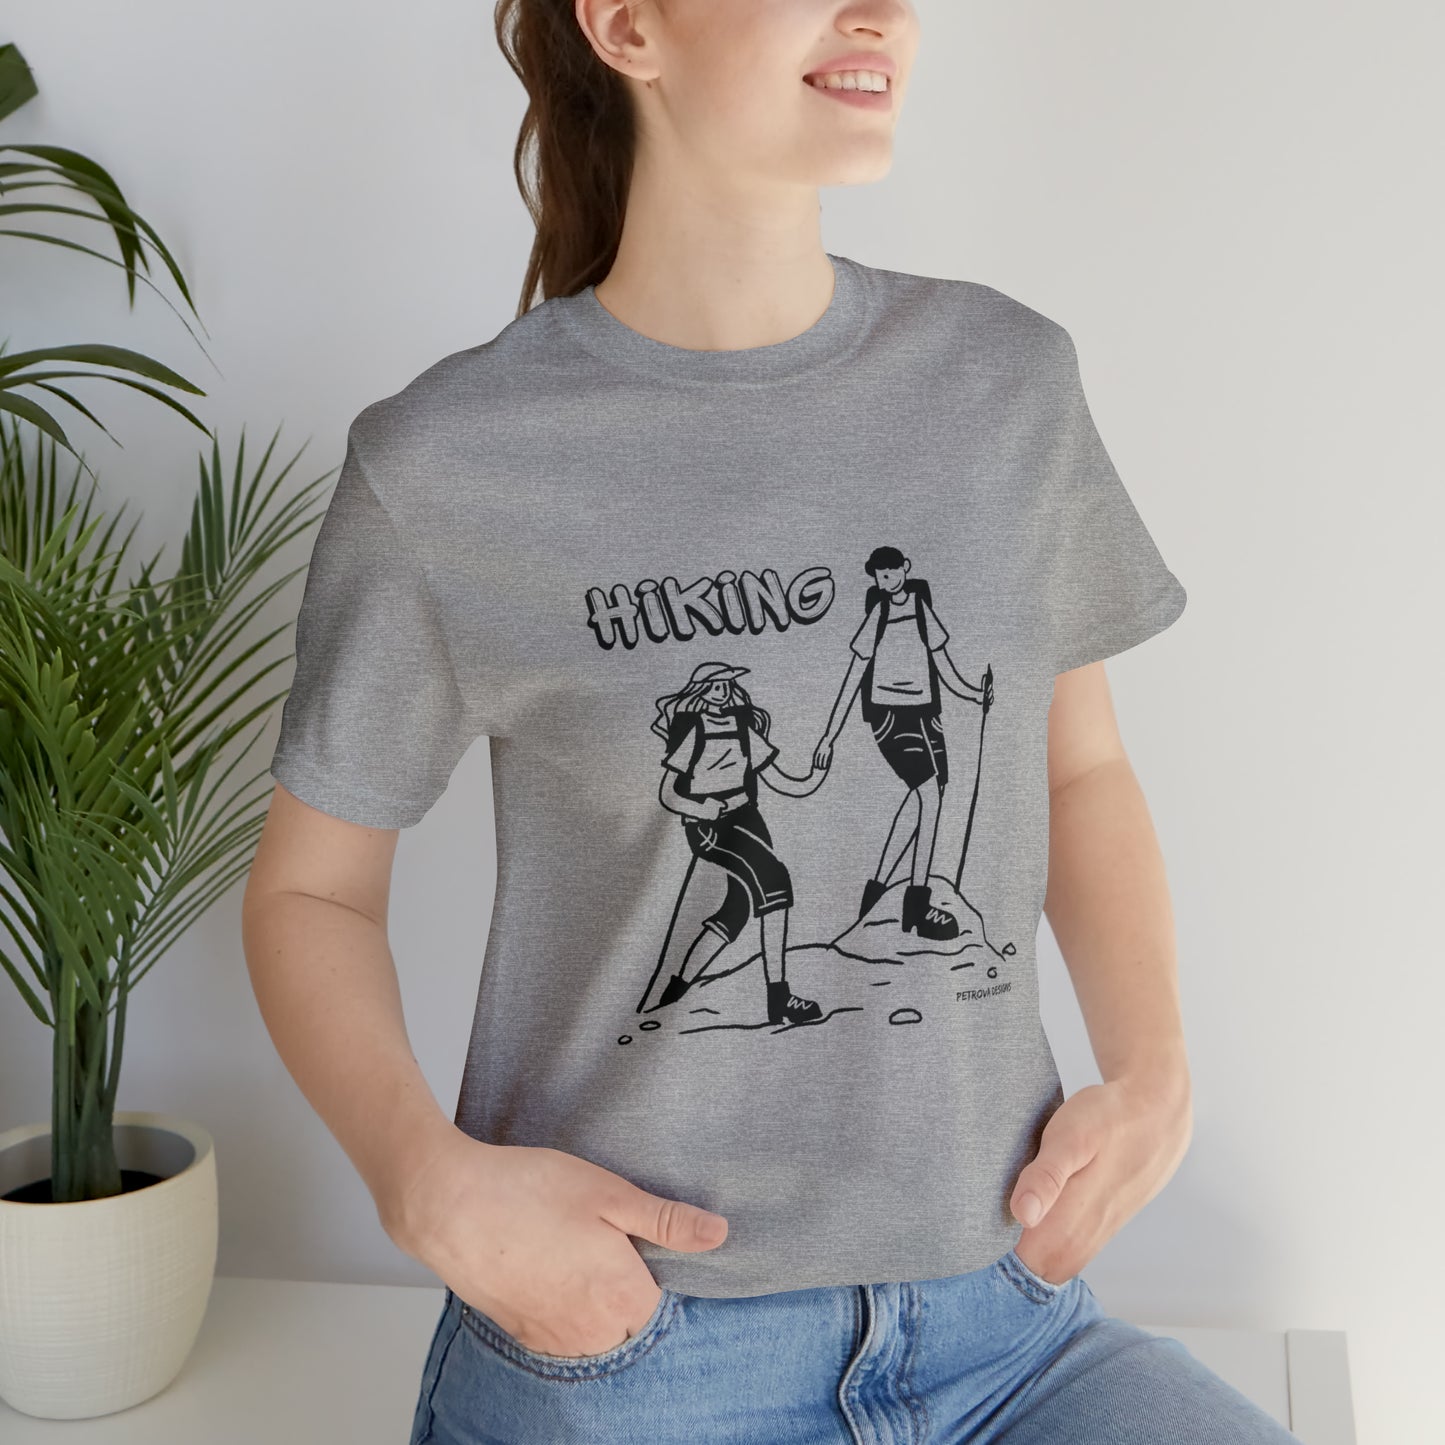 Athletic Heather T-Shirt Tshirt Design Gift for Friend and Family Short Sleeved Shirt Petrova Designs